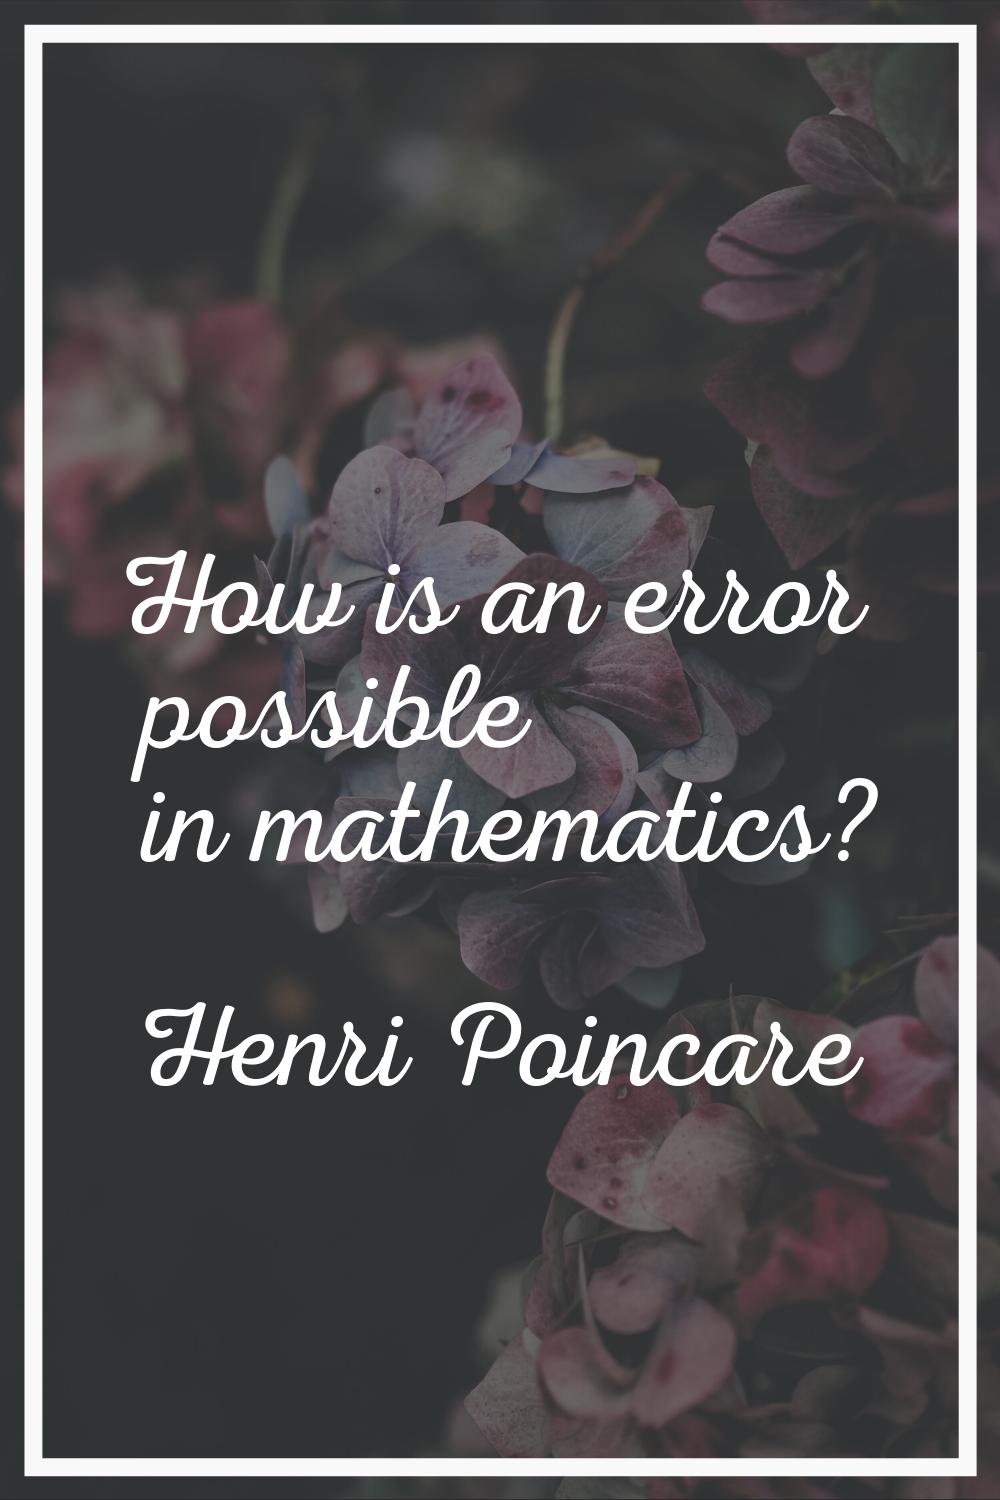 How is an error possible in mathematics?